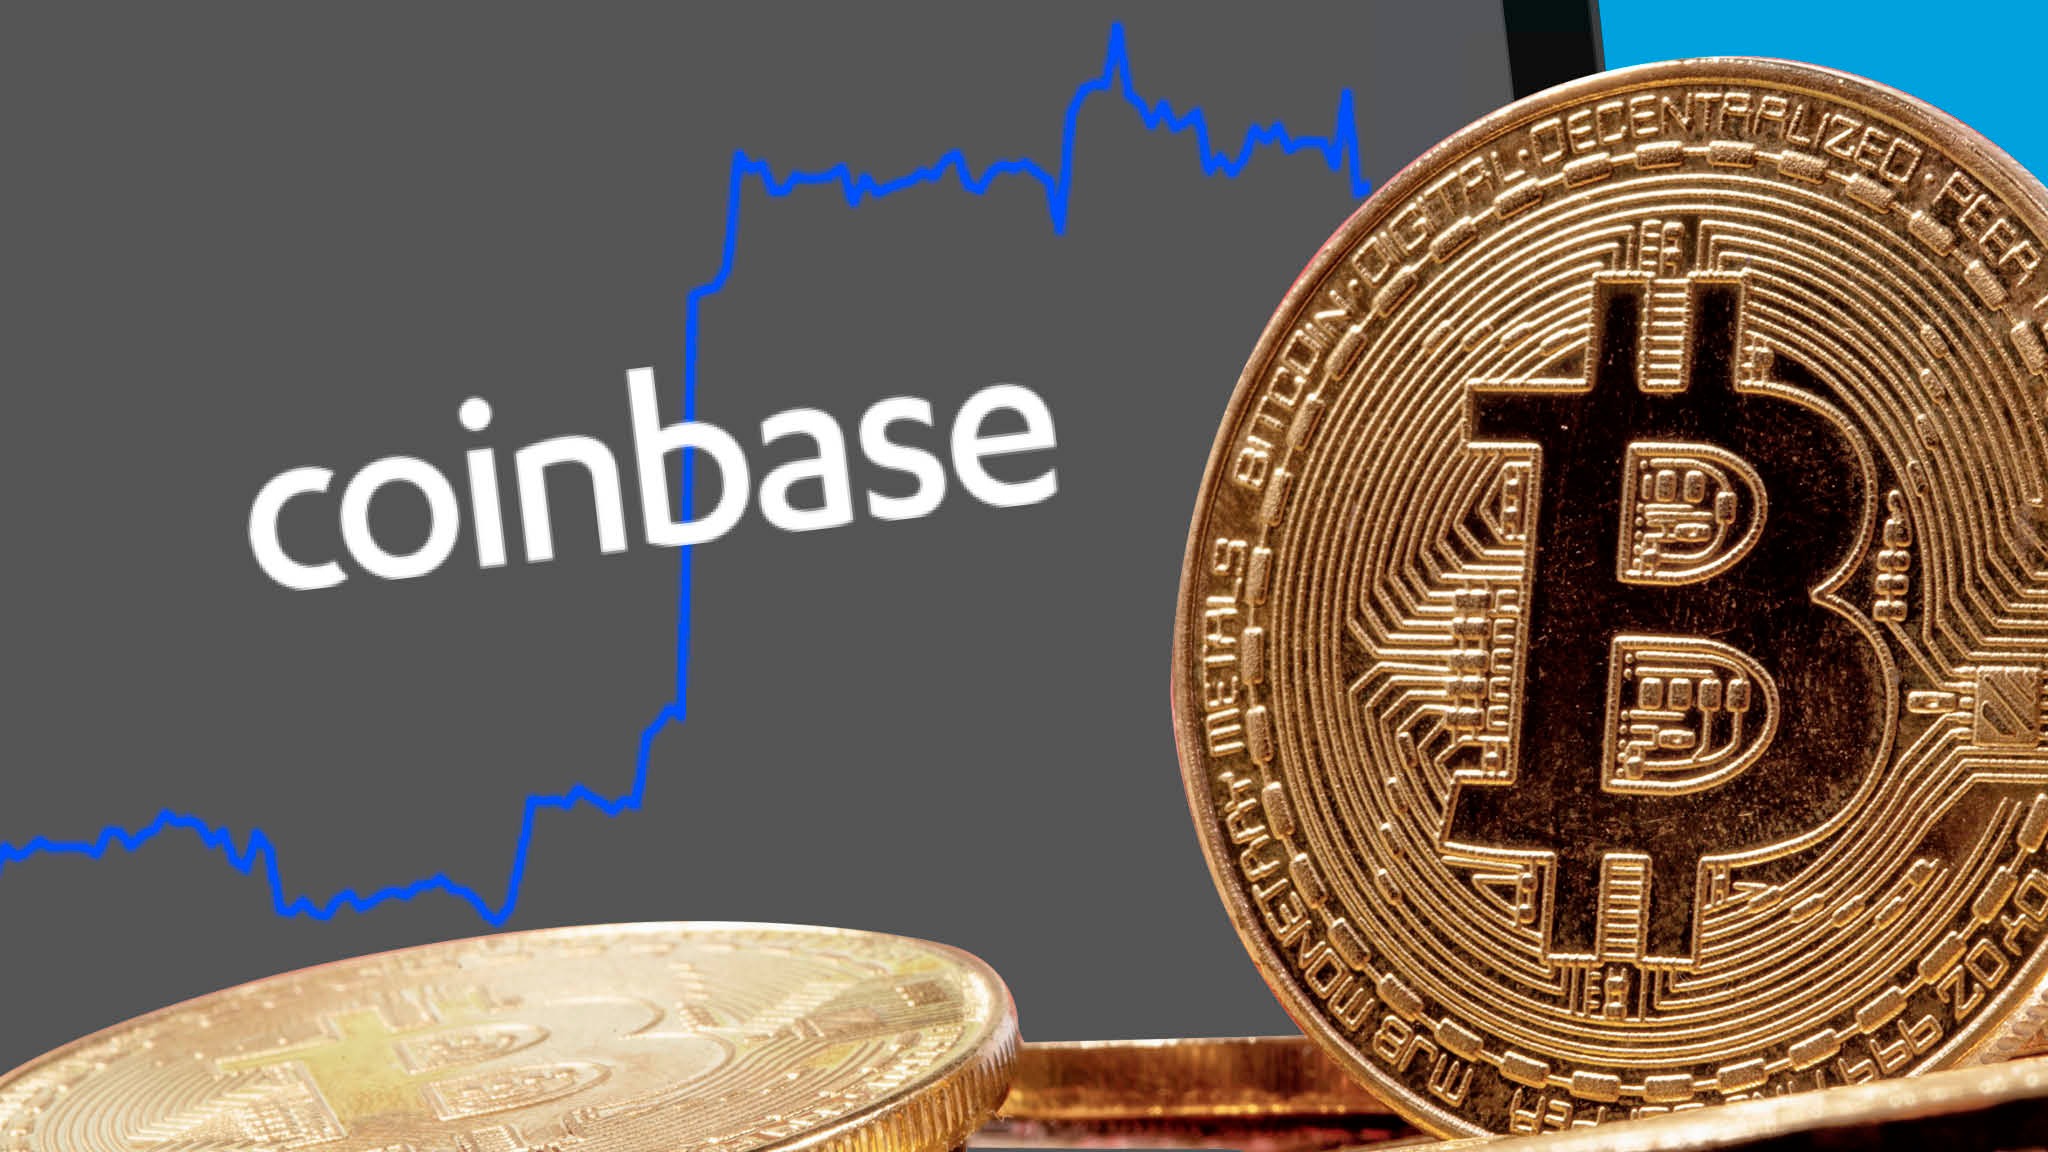 Coinbase Receives $77.79M in BTC from Unknown Sources